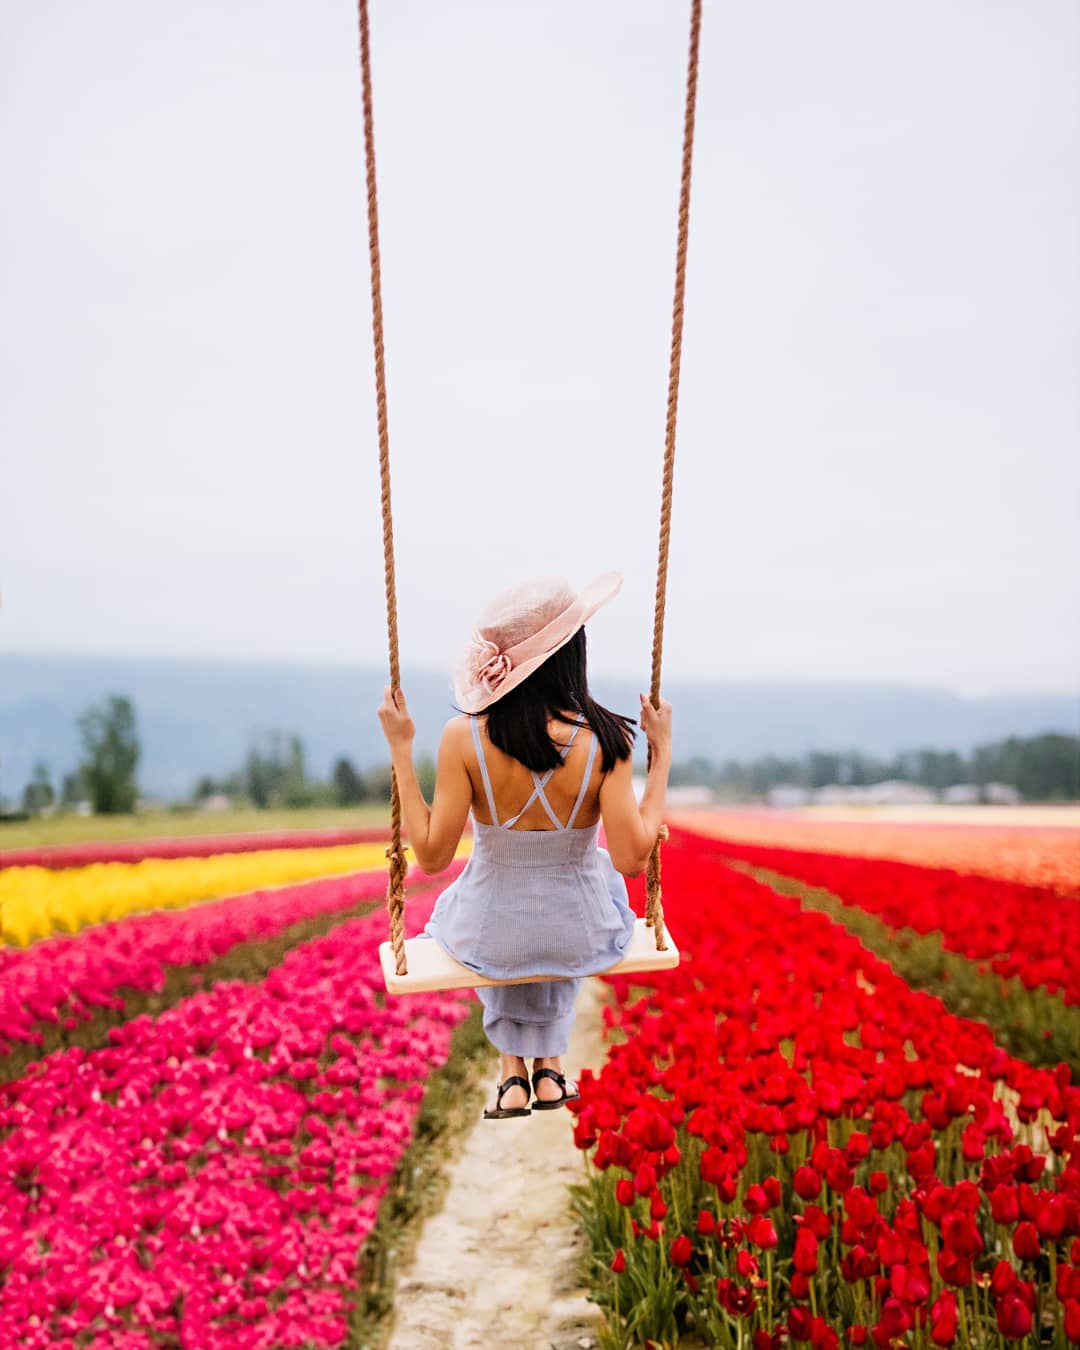 A woman swings out over rows of pink and red tulips at the Chilliwack Tulip Festival. She is wearing a white dress and a wide brimmed pink hat.